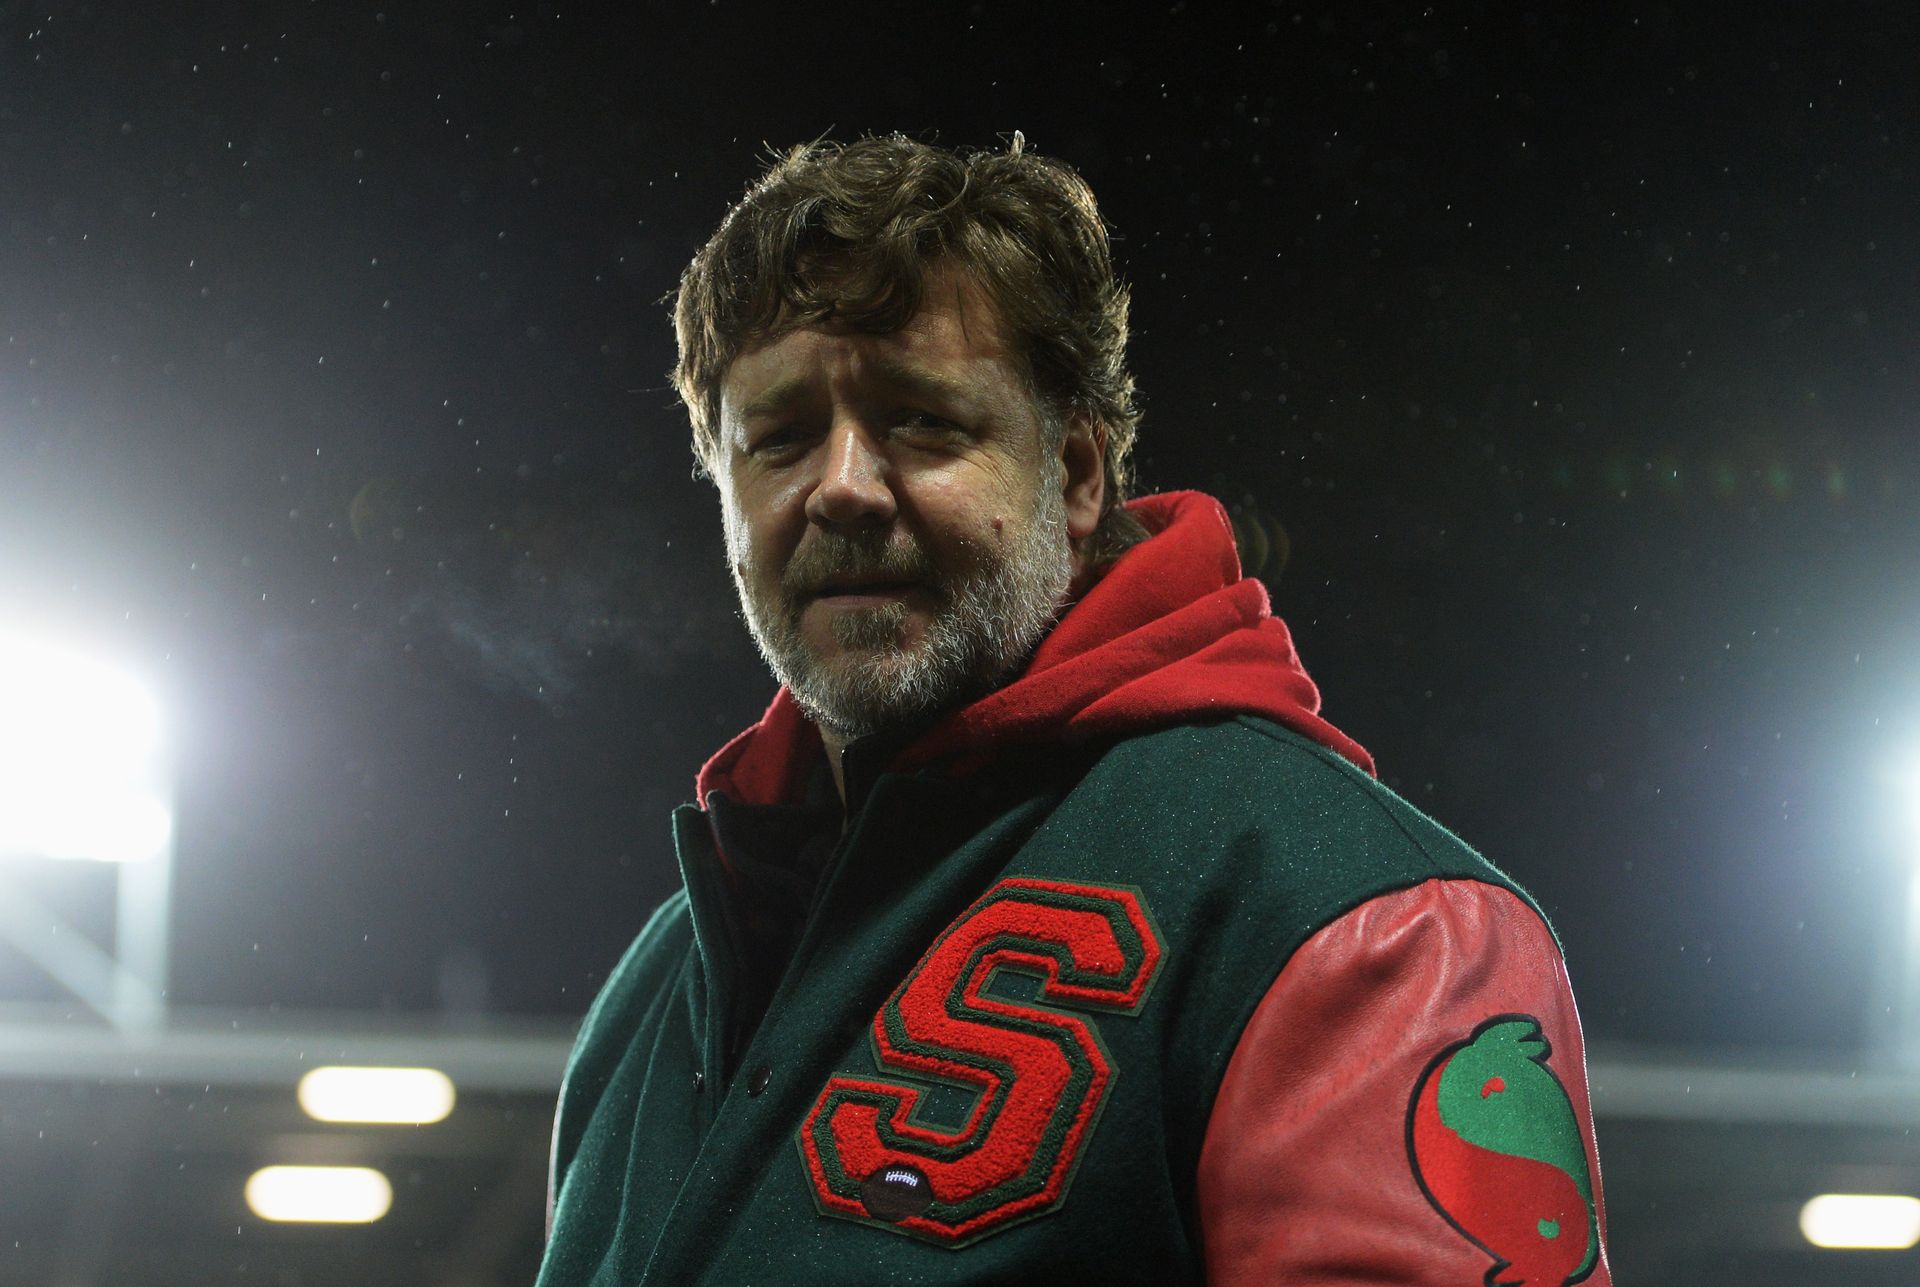 <p>                     Russell Crowe met Francesco Totti and posed with a Roma scarf in 2018, but later claimed to prefer Lazio. He also visited Real Madrid's training ground in 2010.                   </p>                                      <p>                     But the Gladiator star has admitted he grew up supporting Leeds United and after he was urged to buy the club, wrote a series of tweets in which he discussed the possibility. The New Zealand-born actor also narrated a documentary on Marcelo Bielsa's first season at Elland Road.                   </p>